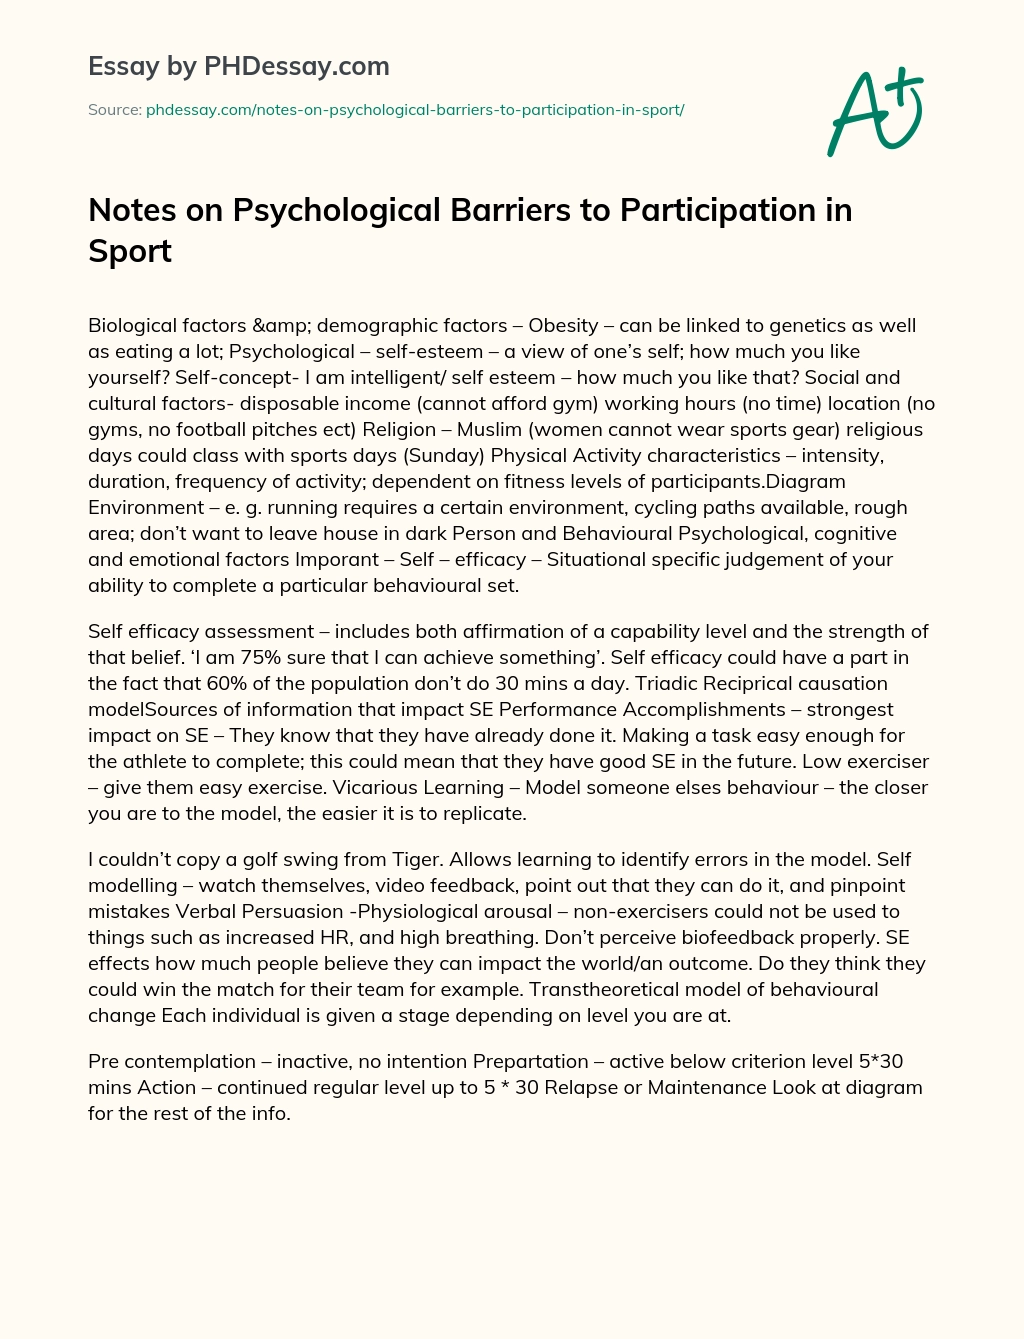 Notes on Psychological Barriers to Participation in Sport essay